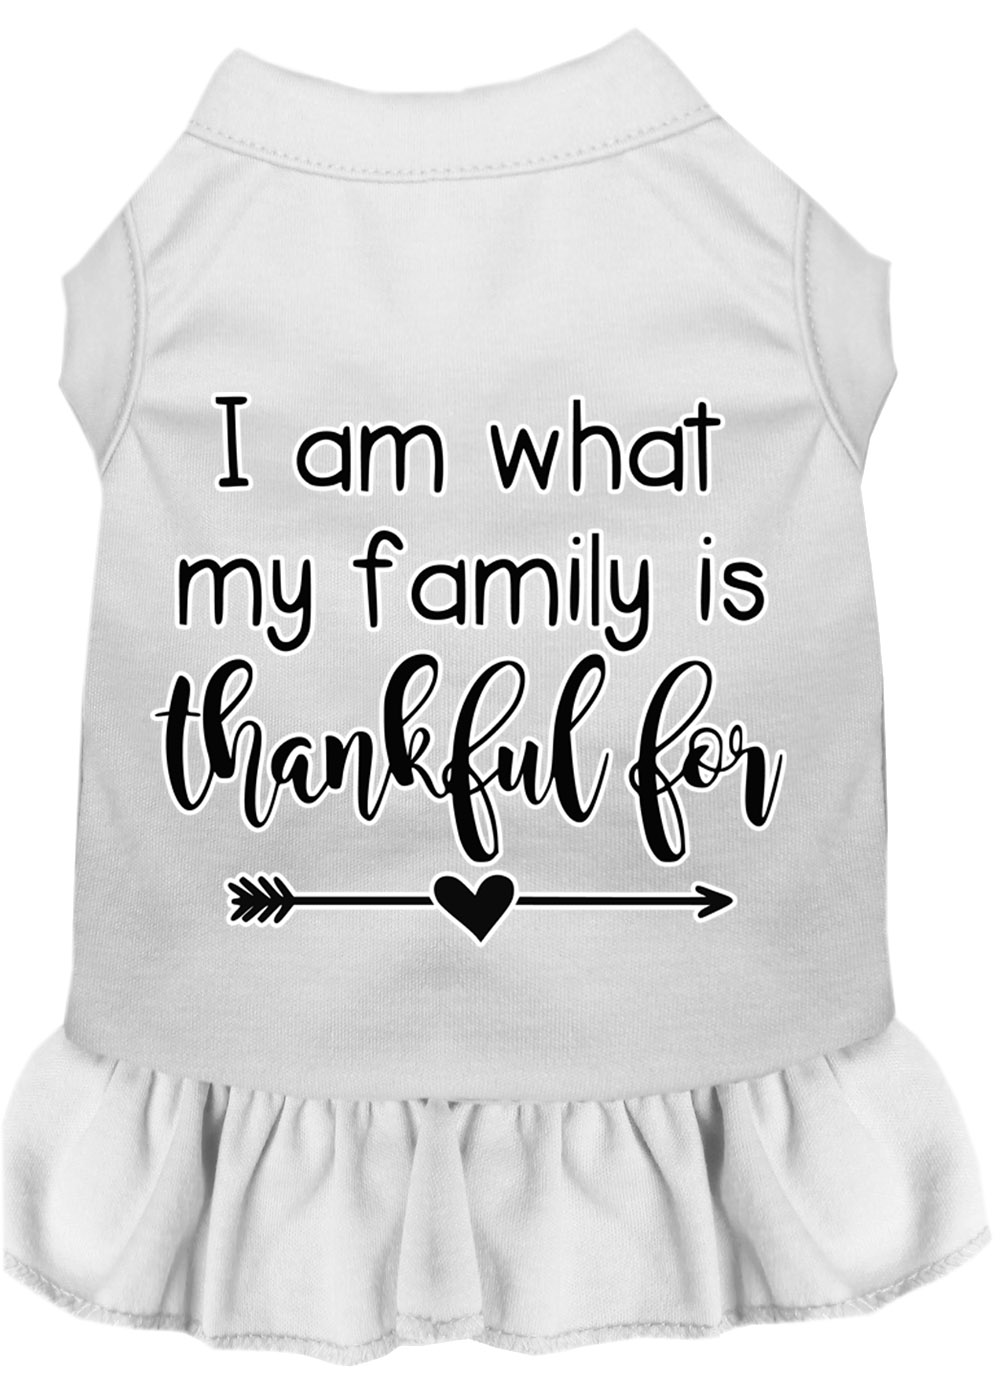 I Am What My Family is Thankful For Screen Print Dog Dress White Med